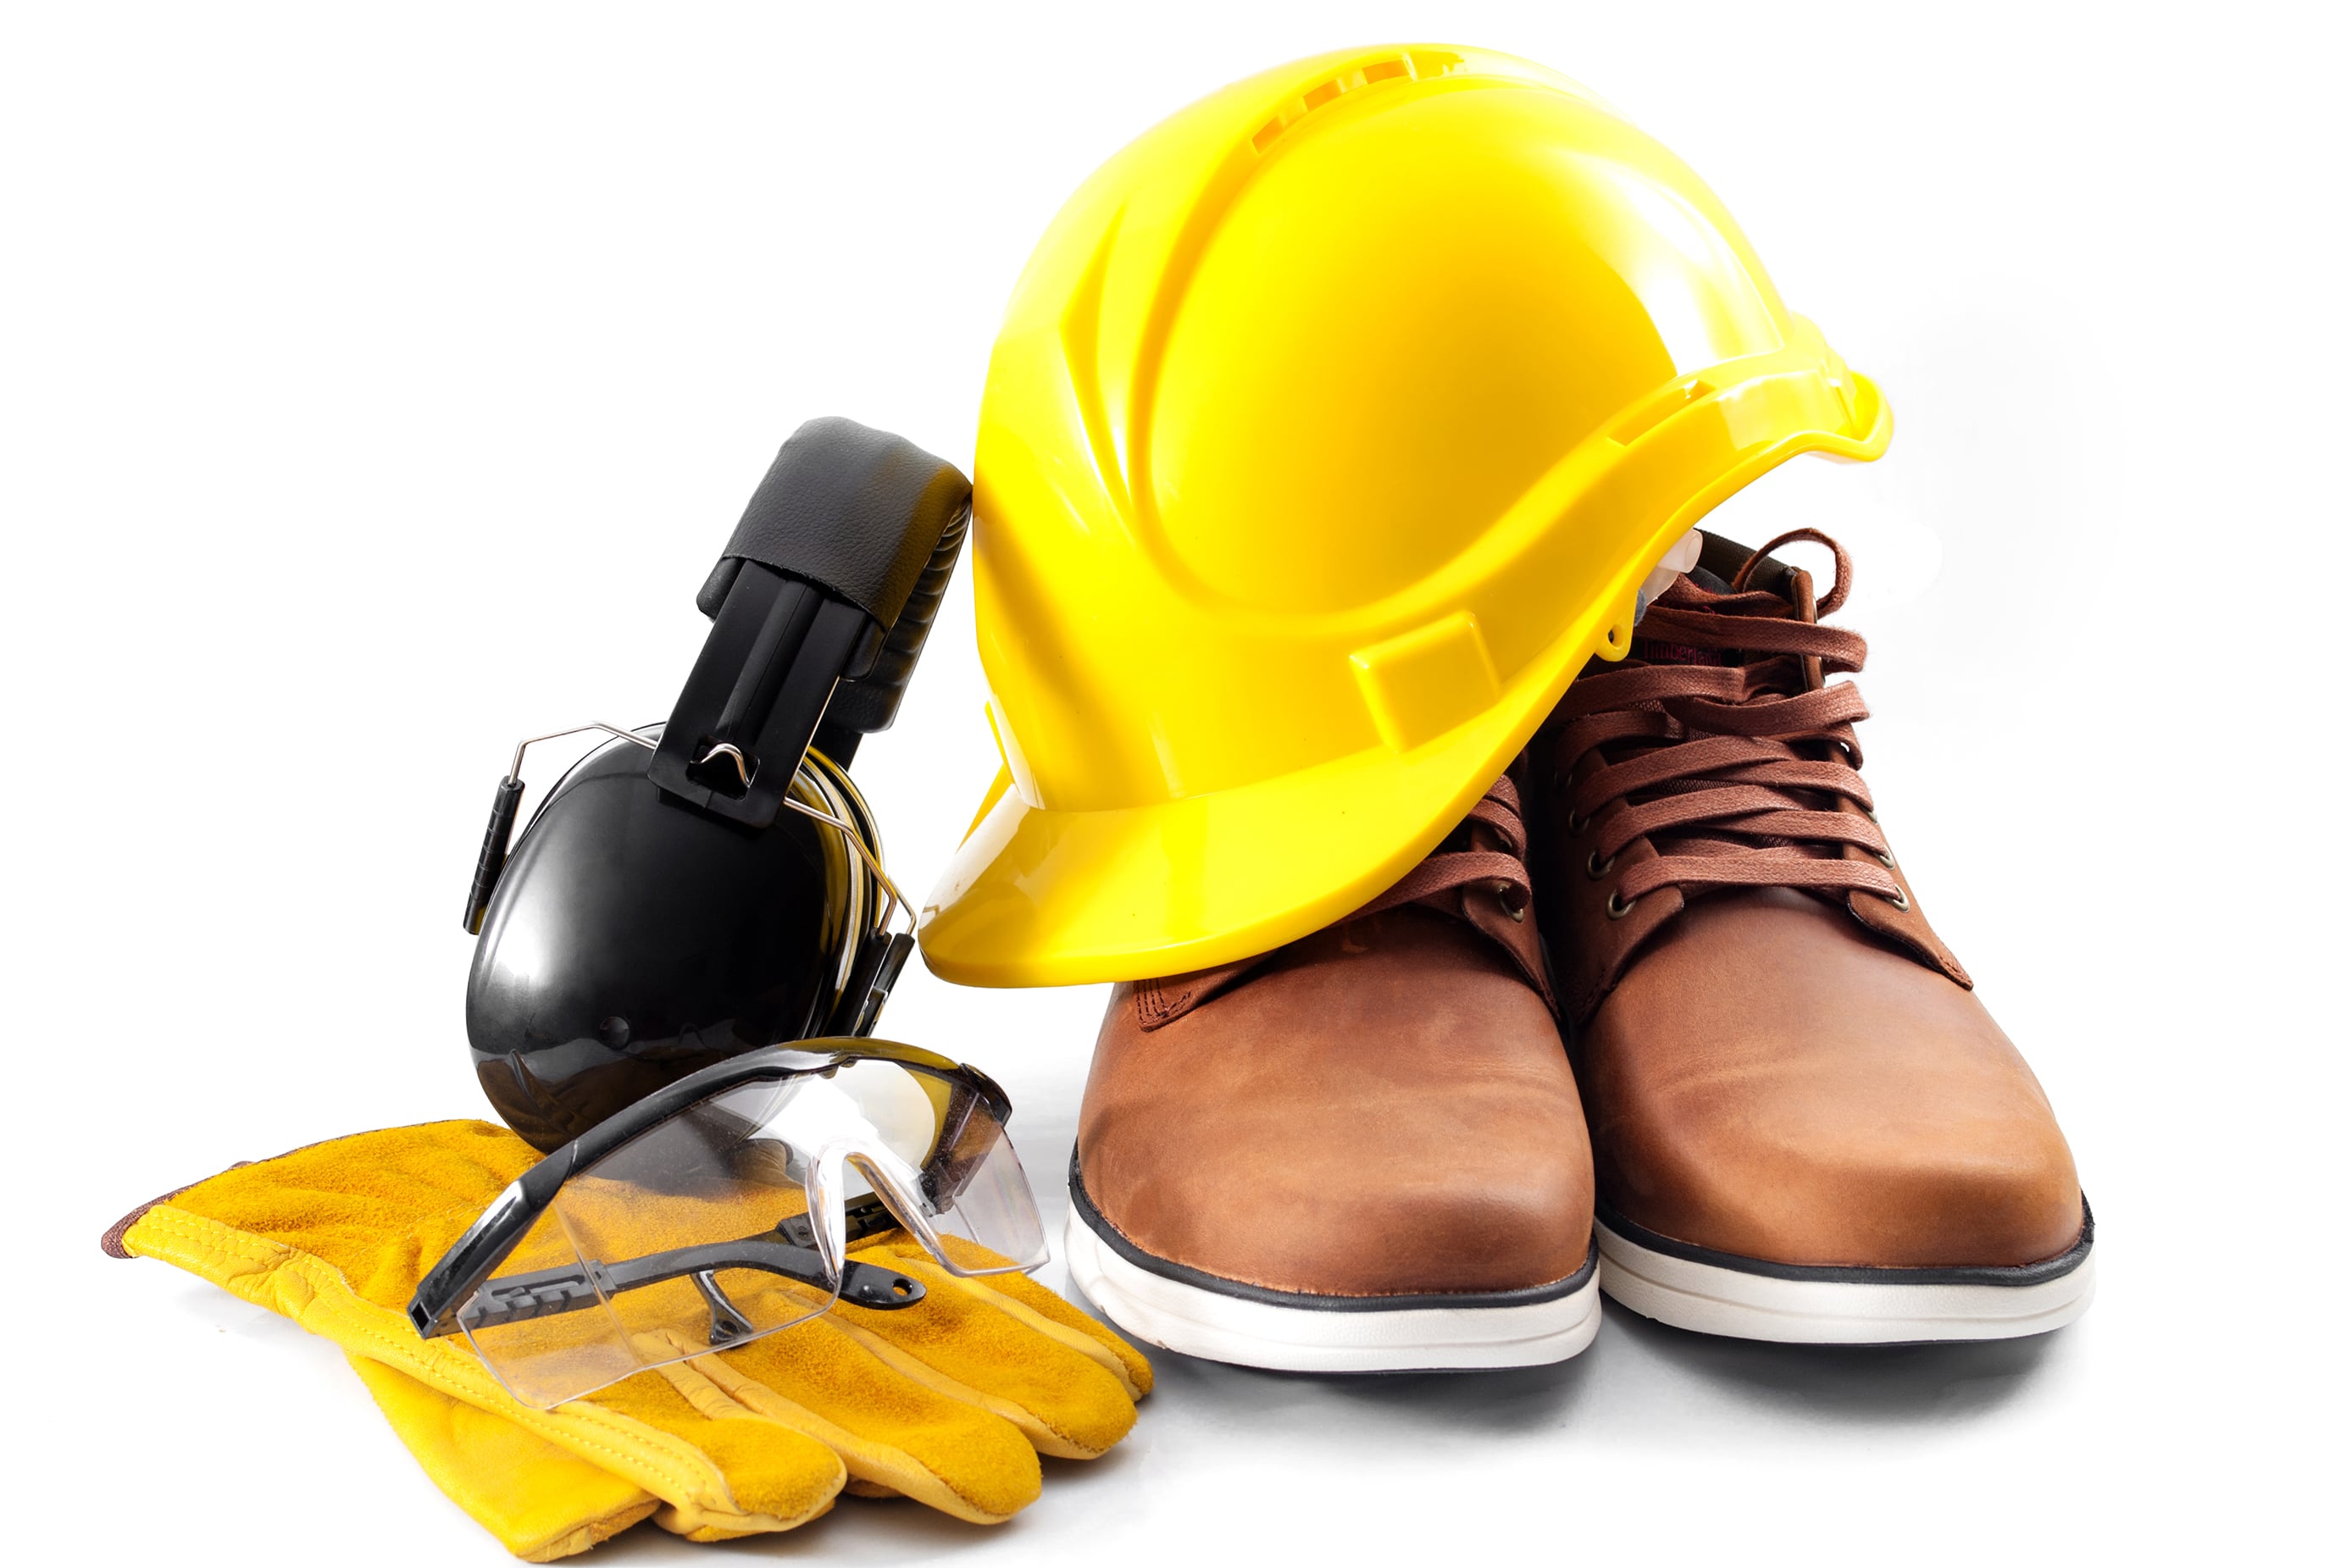 How to Save Money on Workers' Compensation Insurance